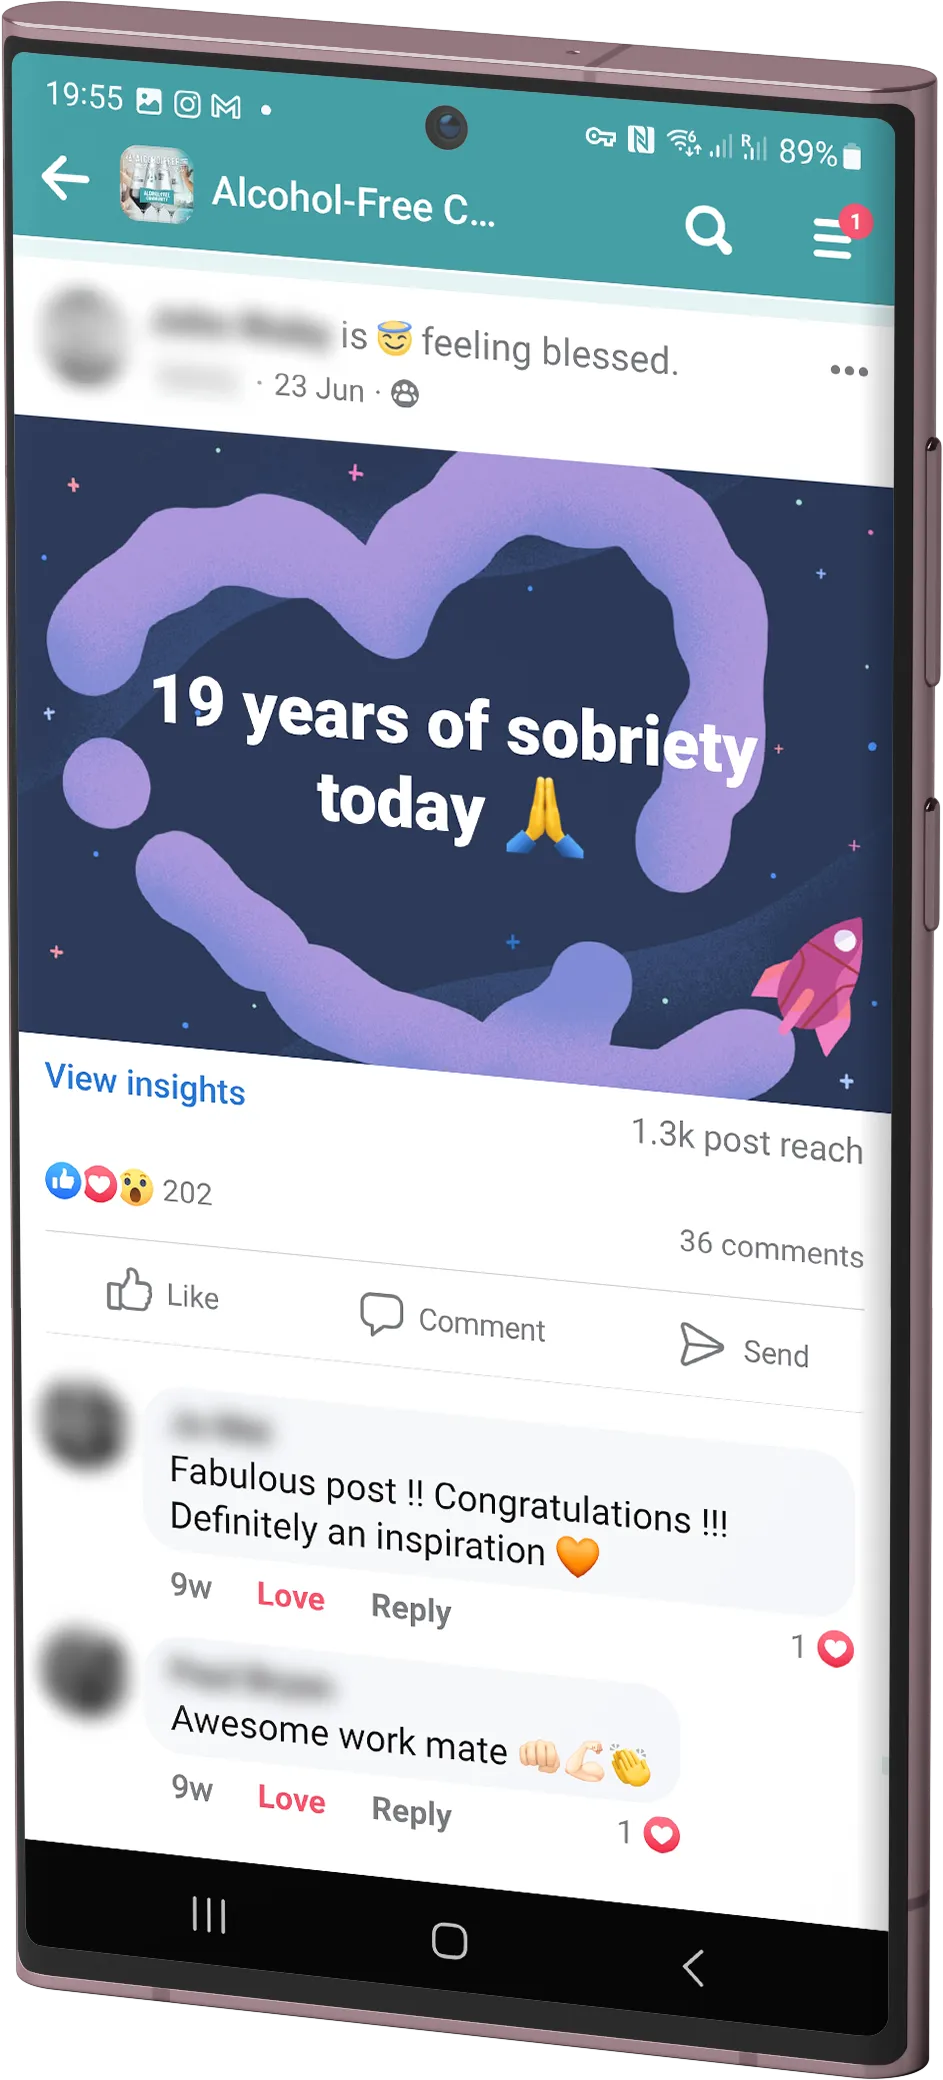 Mobile phone showing the Alcohol-Free Community group on Facebook